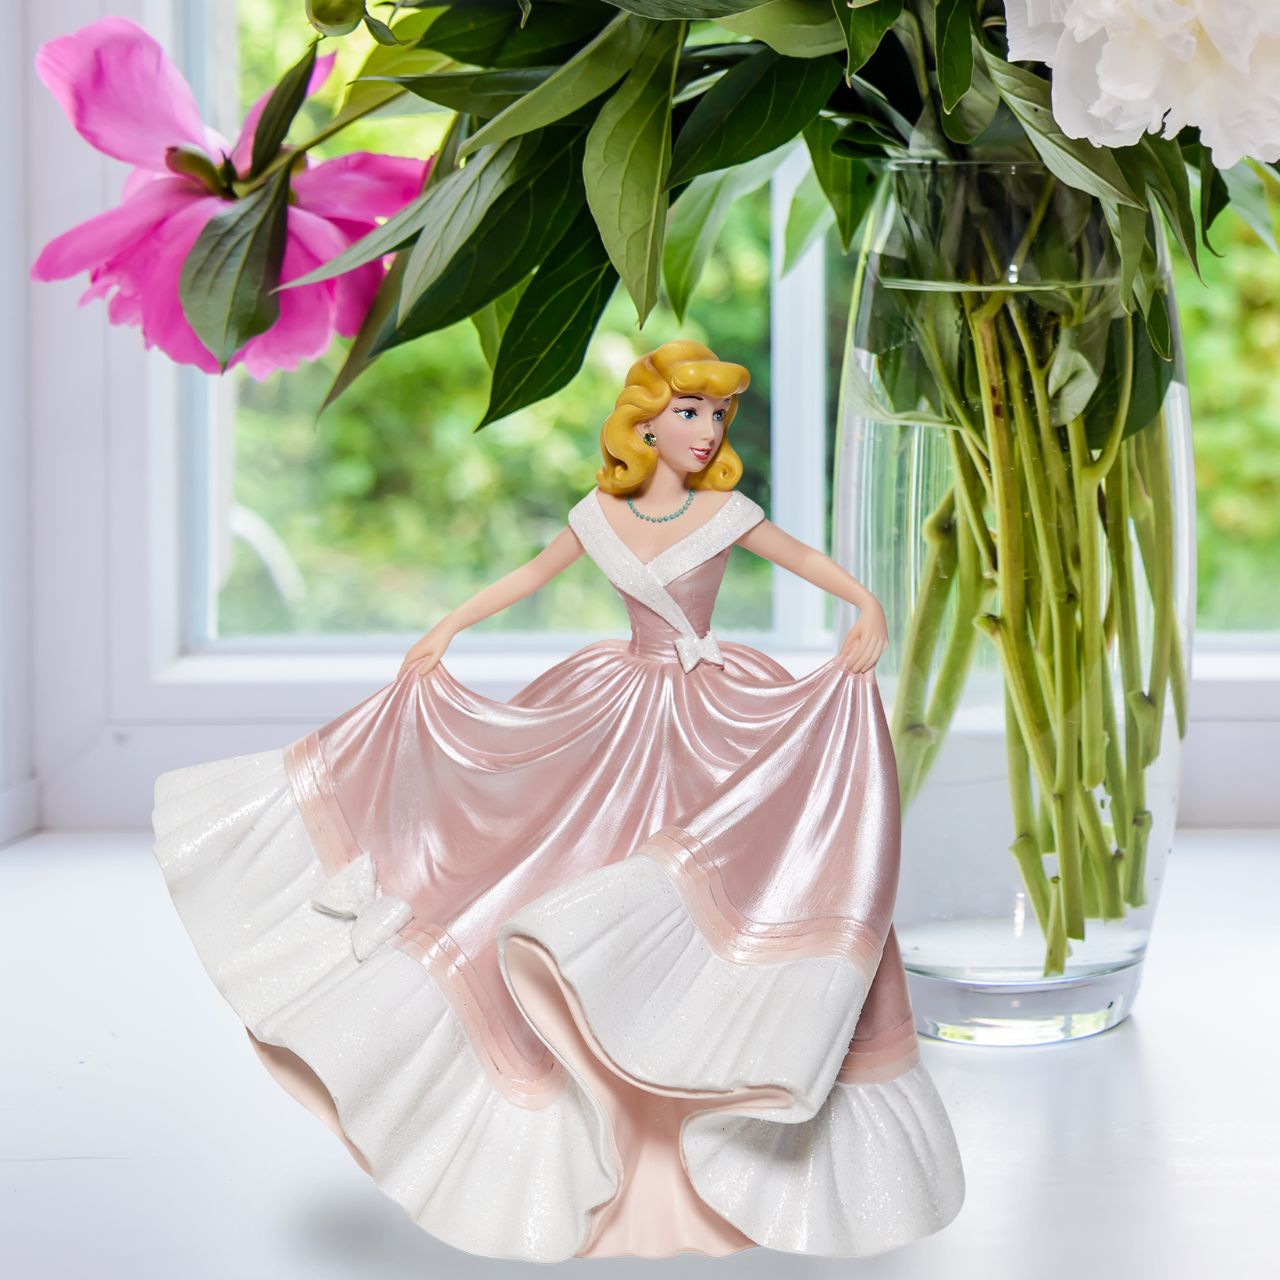 Cinderella in Pink Dress Couture de Force Figurine  Disney Couture de Force celebrates the 70th Anniversary of Cinderella. She is captured here in her classic pink gown of "what might have been." With the help of her mice tailors, the dress shimmers with satin finishes, iridescent glitter and jewels. Supplied in branded gift box.